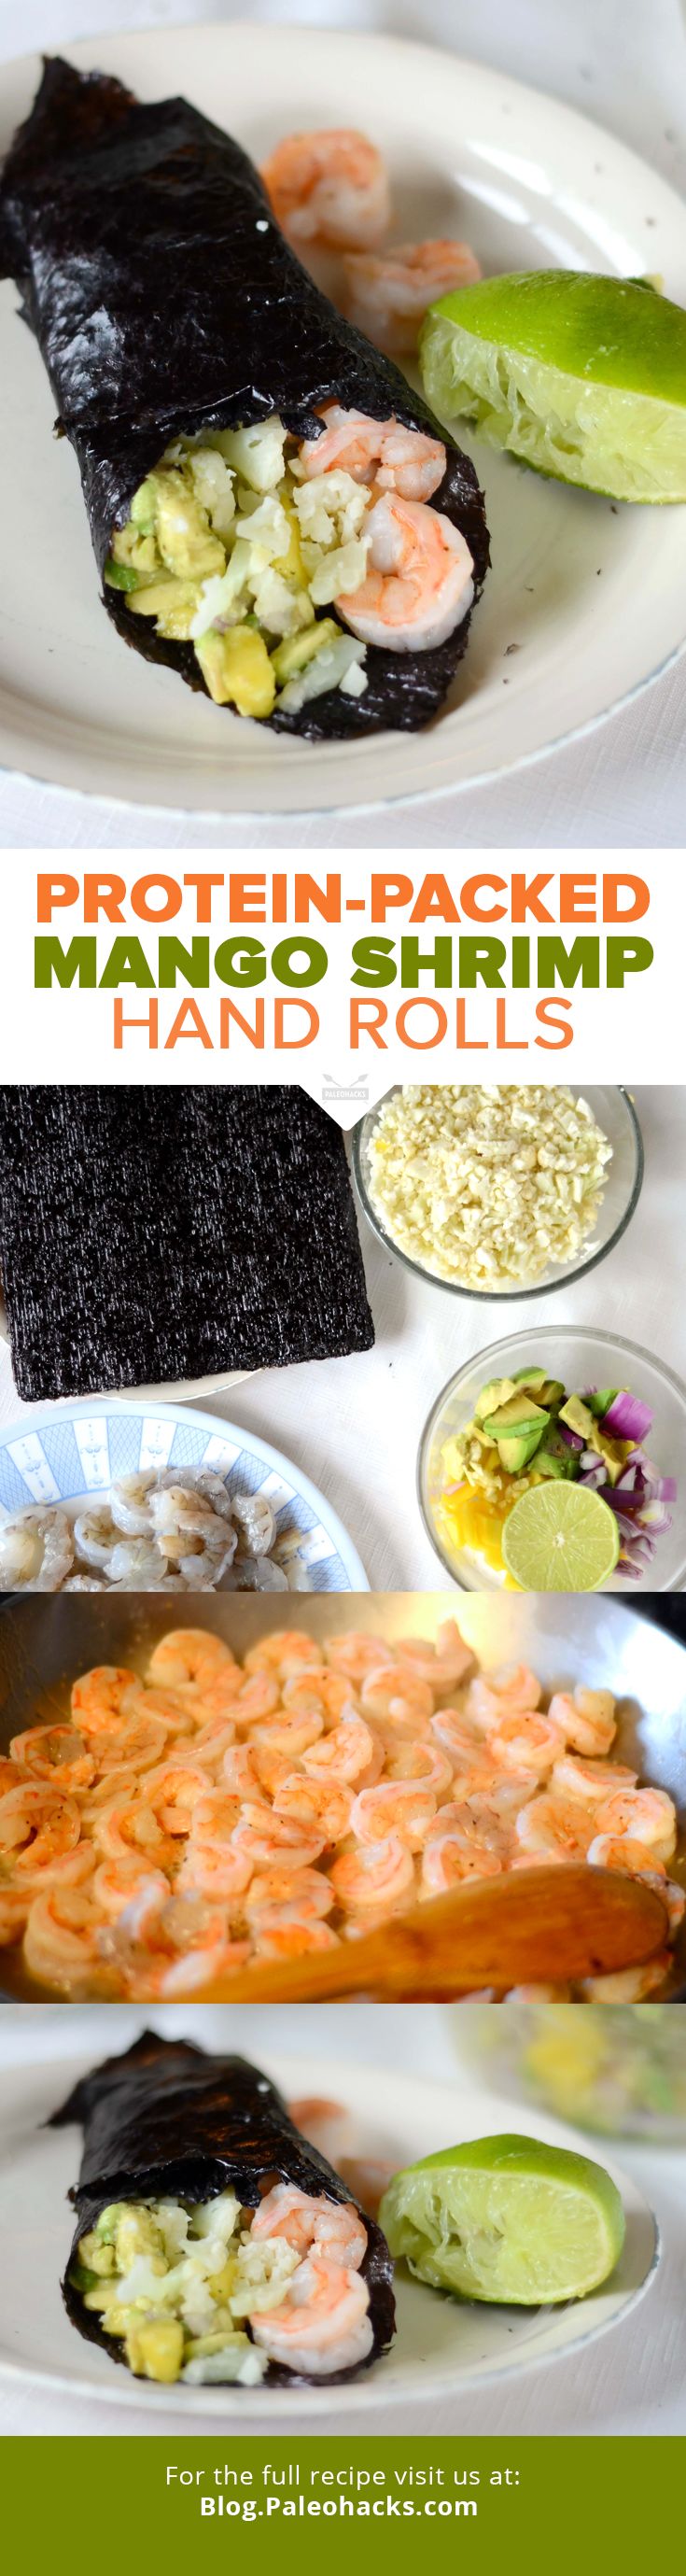 PIN_Protein-Packed_Mango_Shrimp_Hand_Rolls